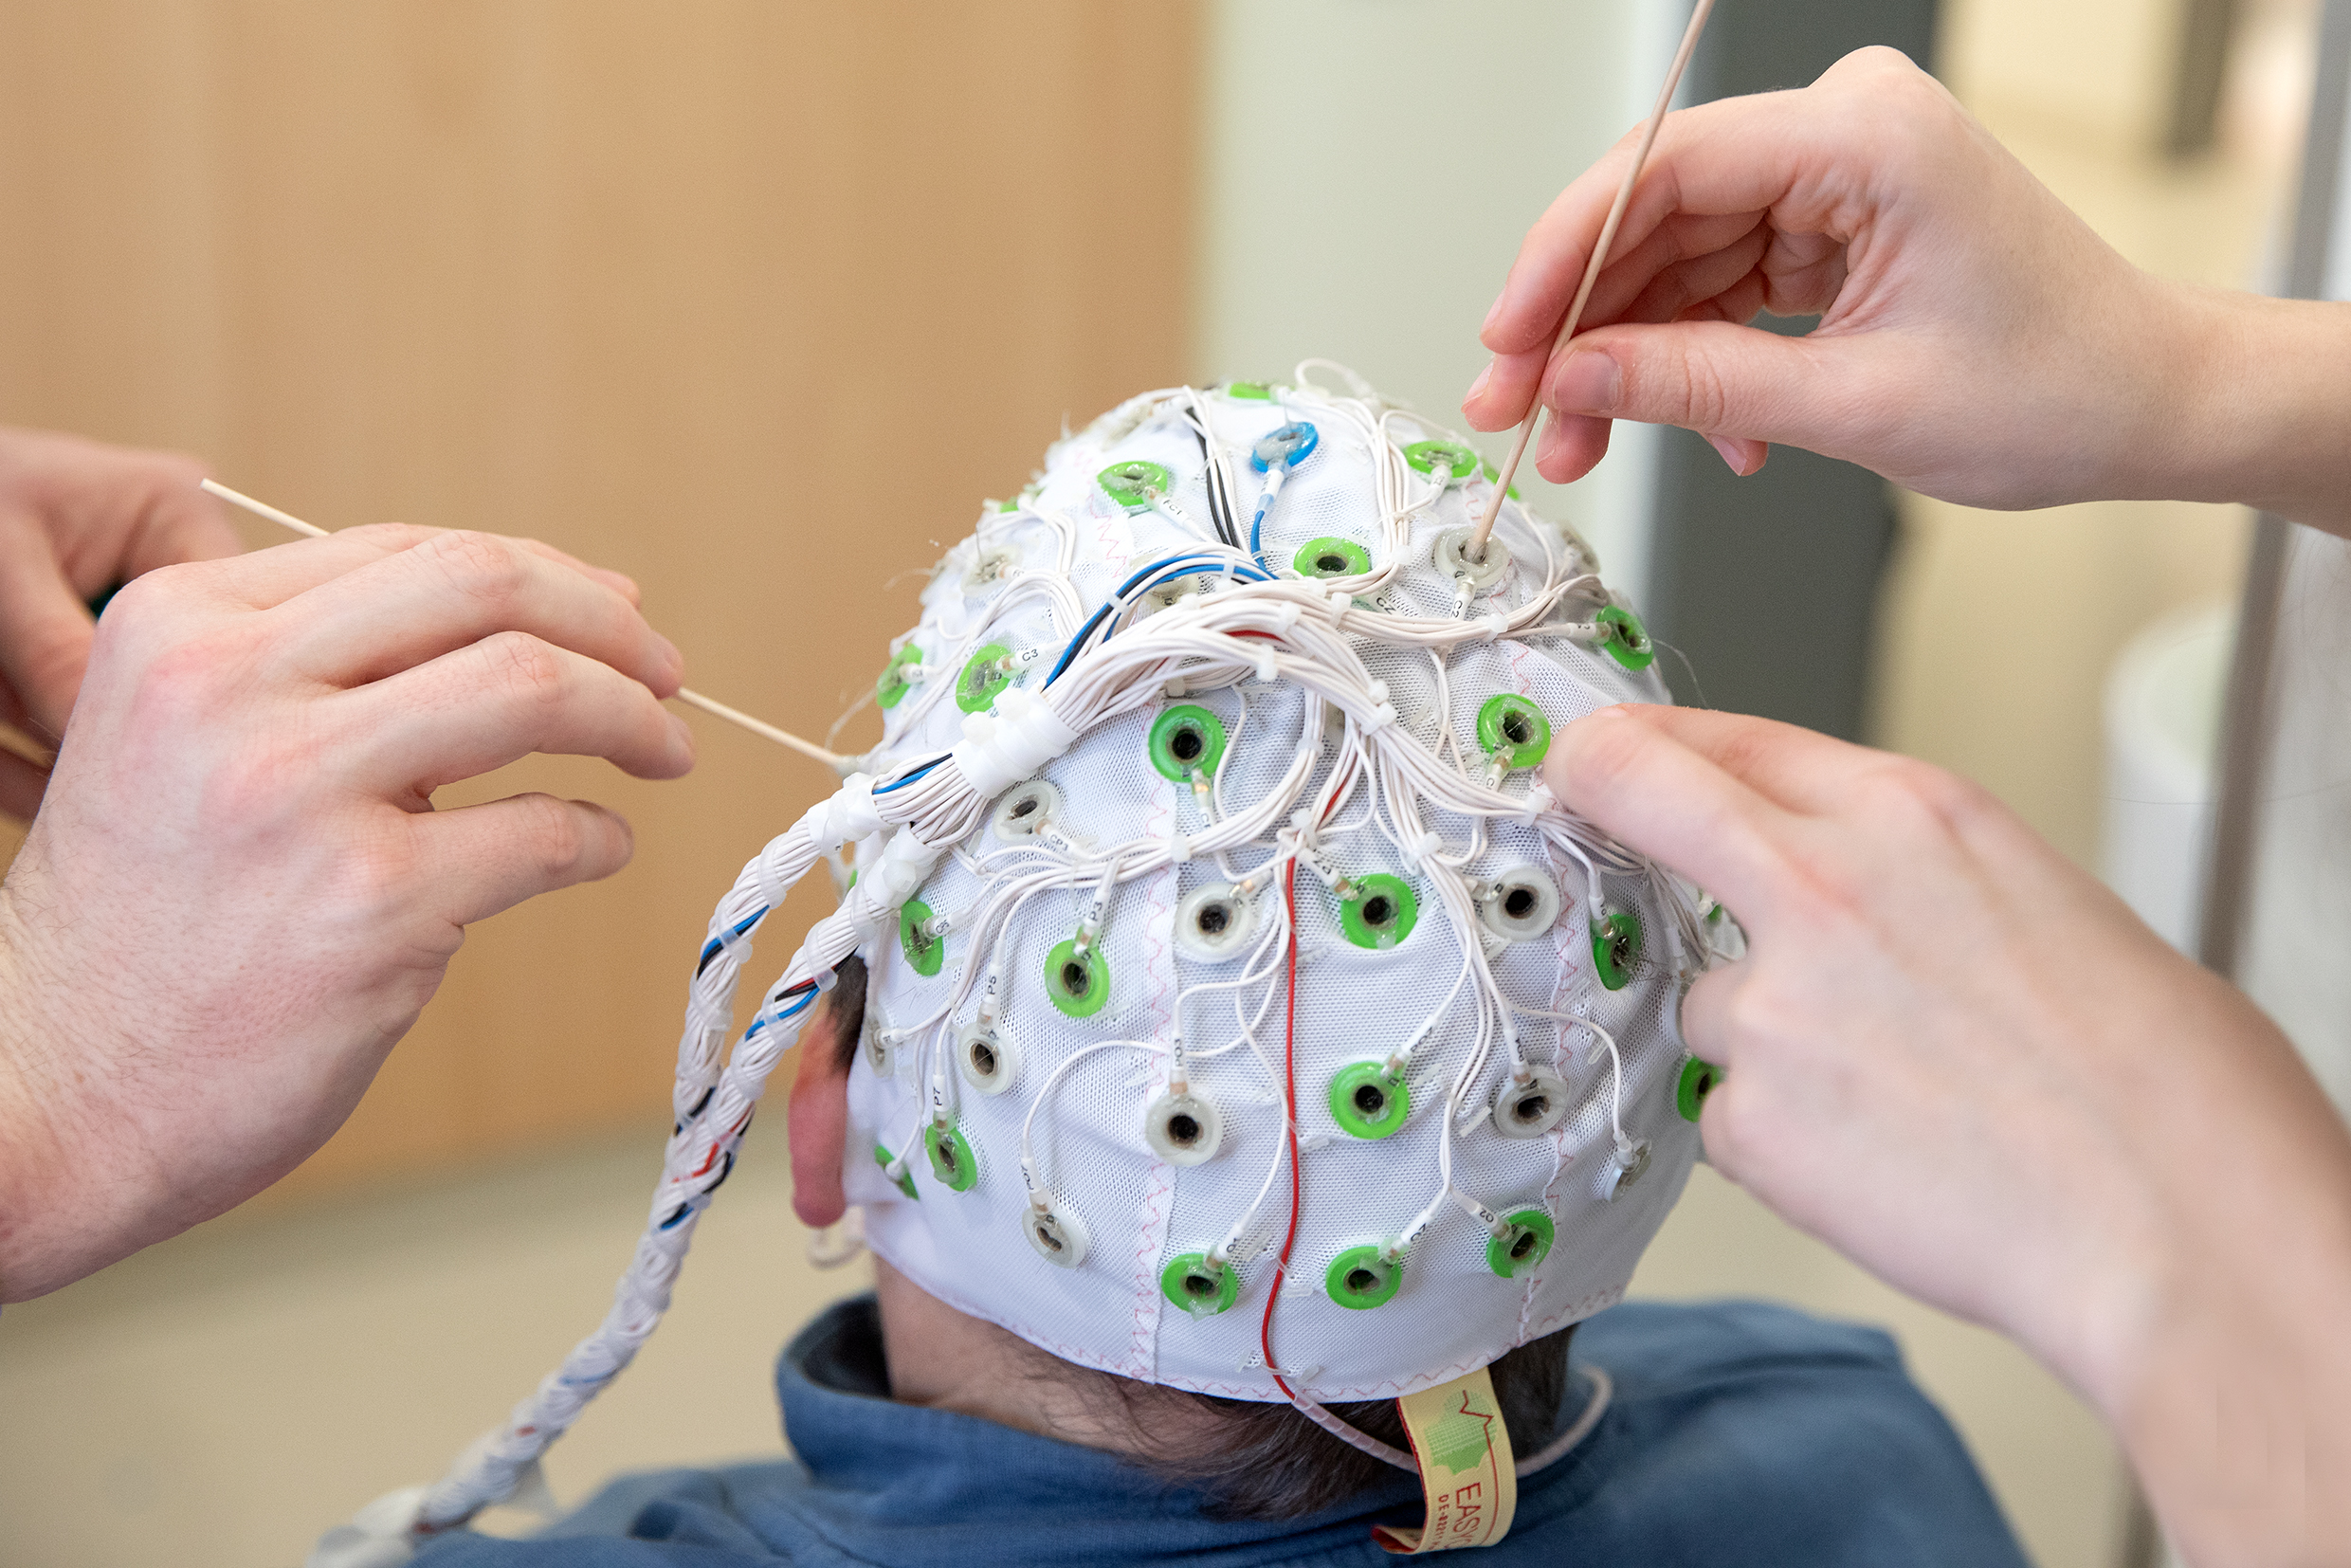 Two pairs of hands apply contact gel to the electrodes of an EEG cap.